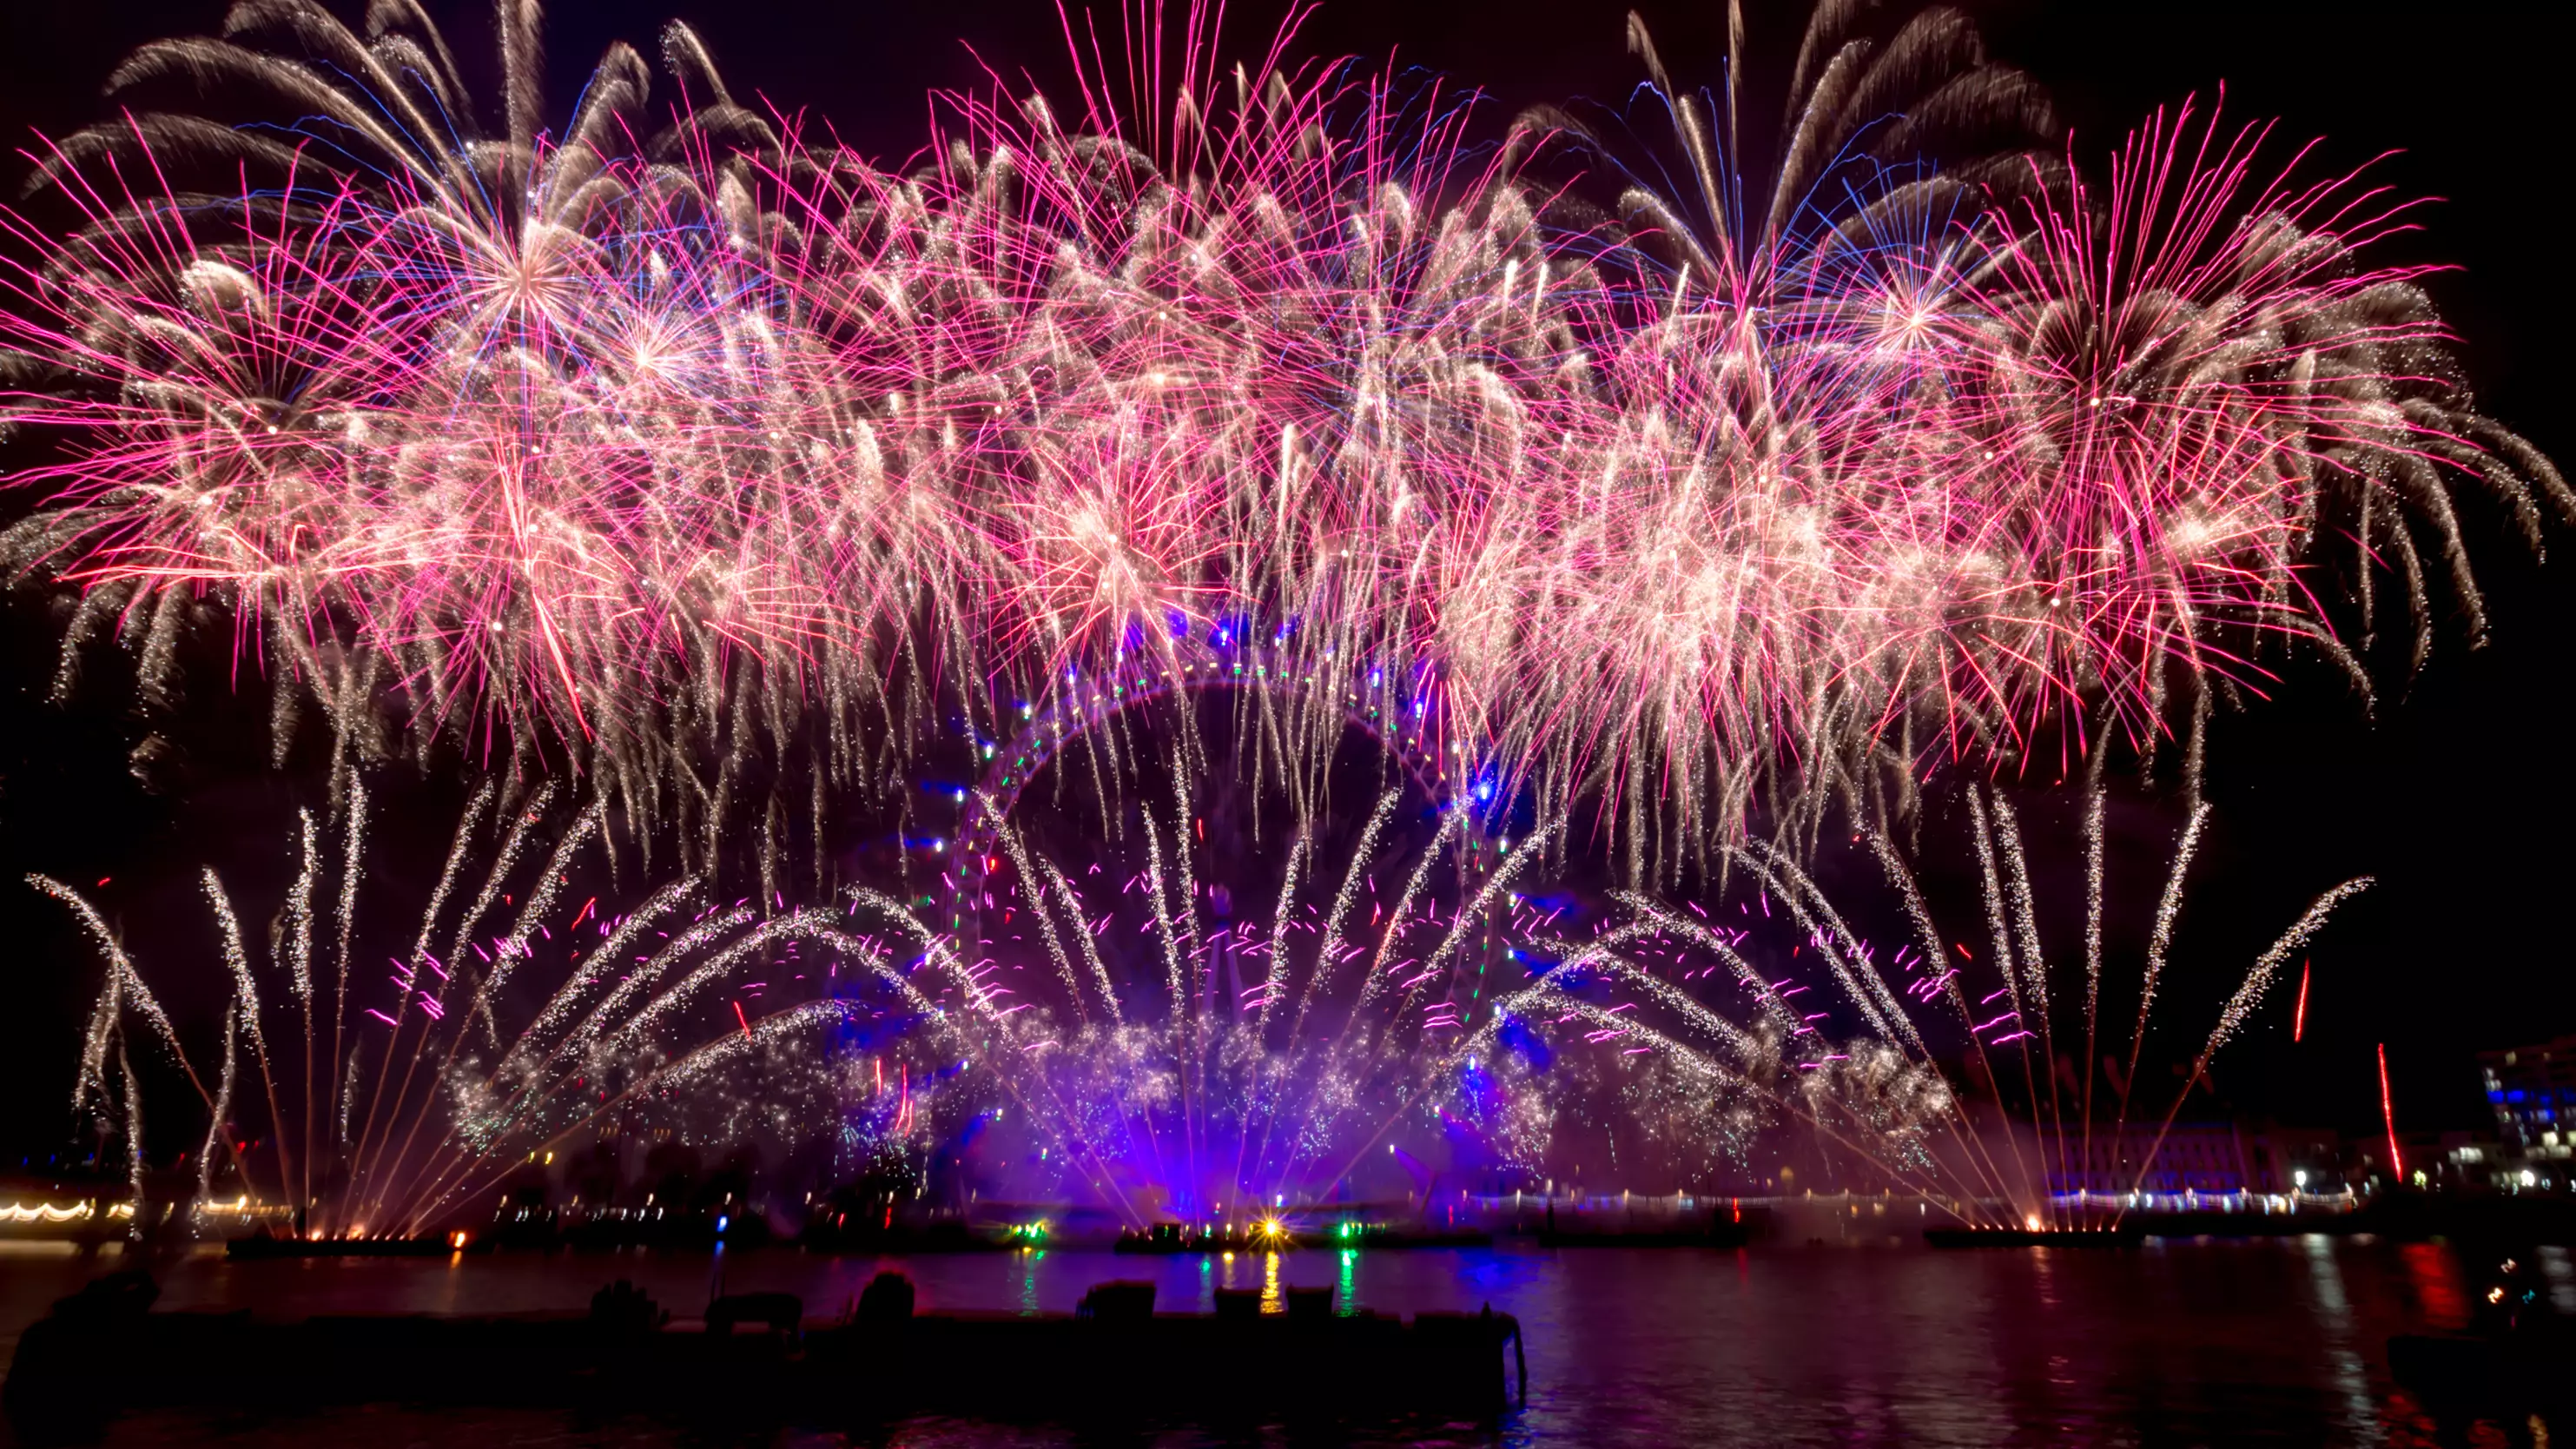 London's New Year's Eve Fireworks Cancelled Due To Coronavirus Pandemic